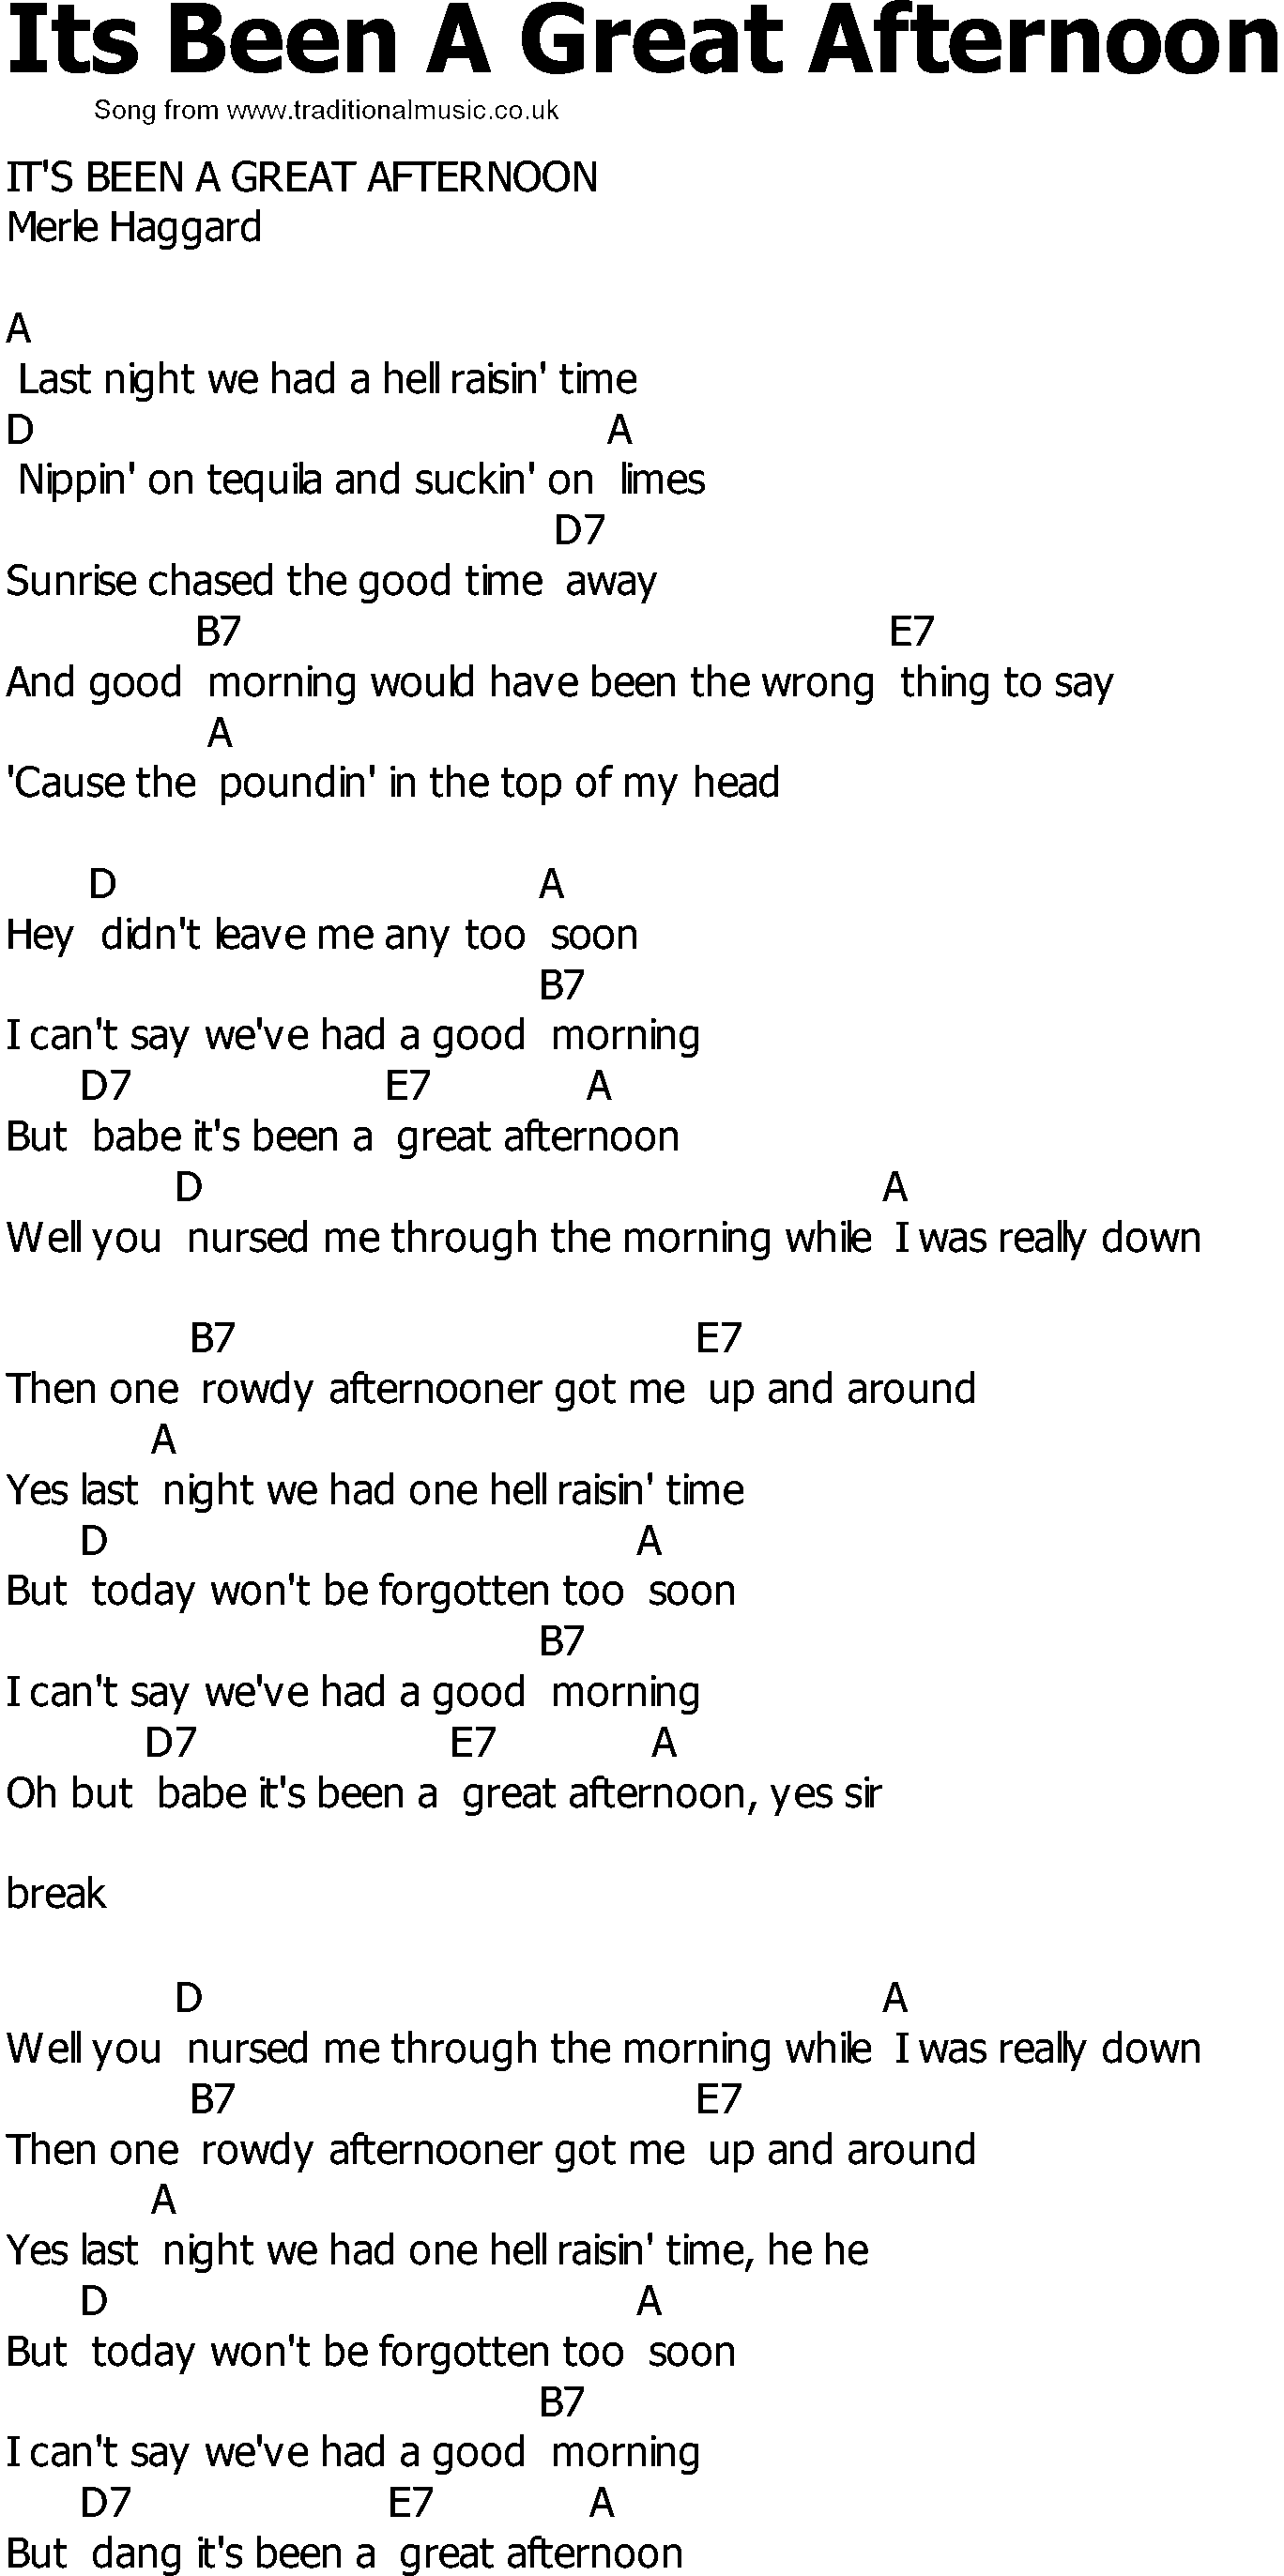 Old Country song lyrics with chords - Its Been A Great Afternoon